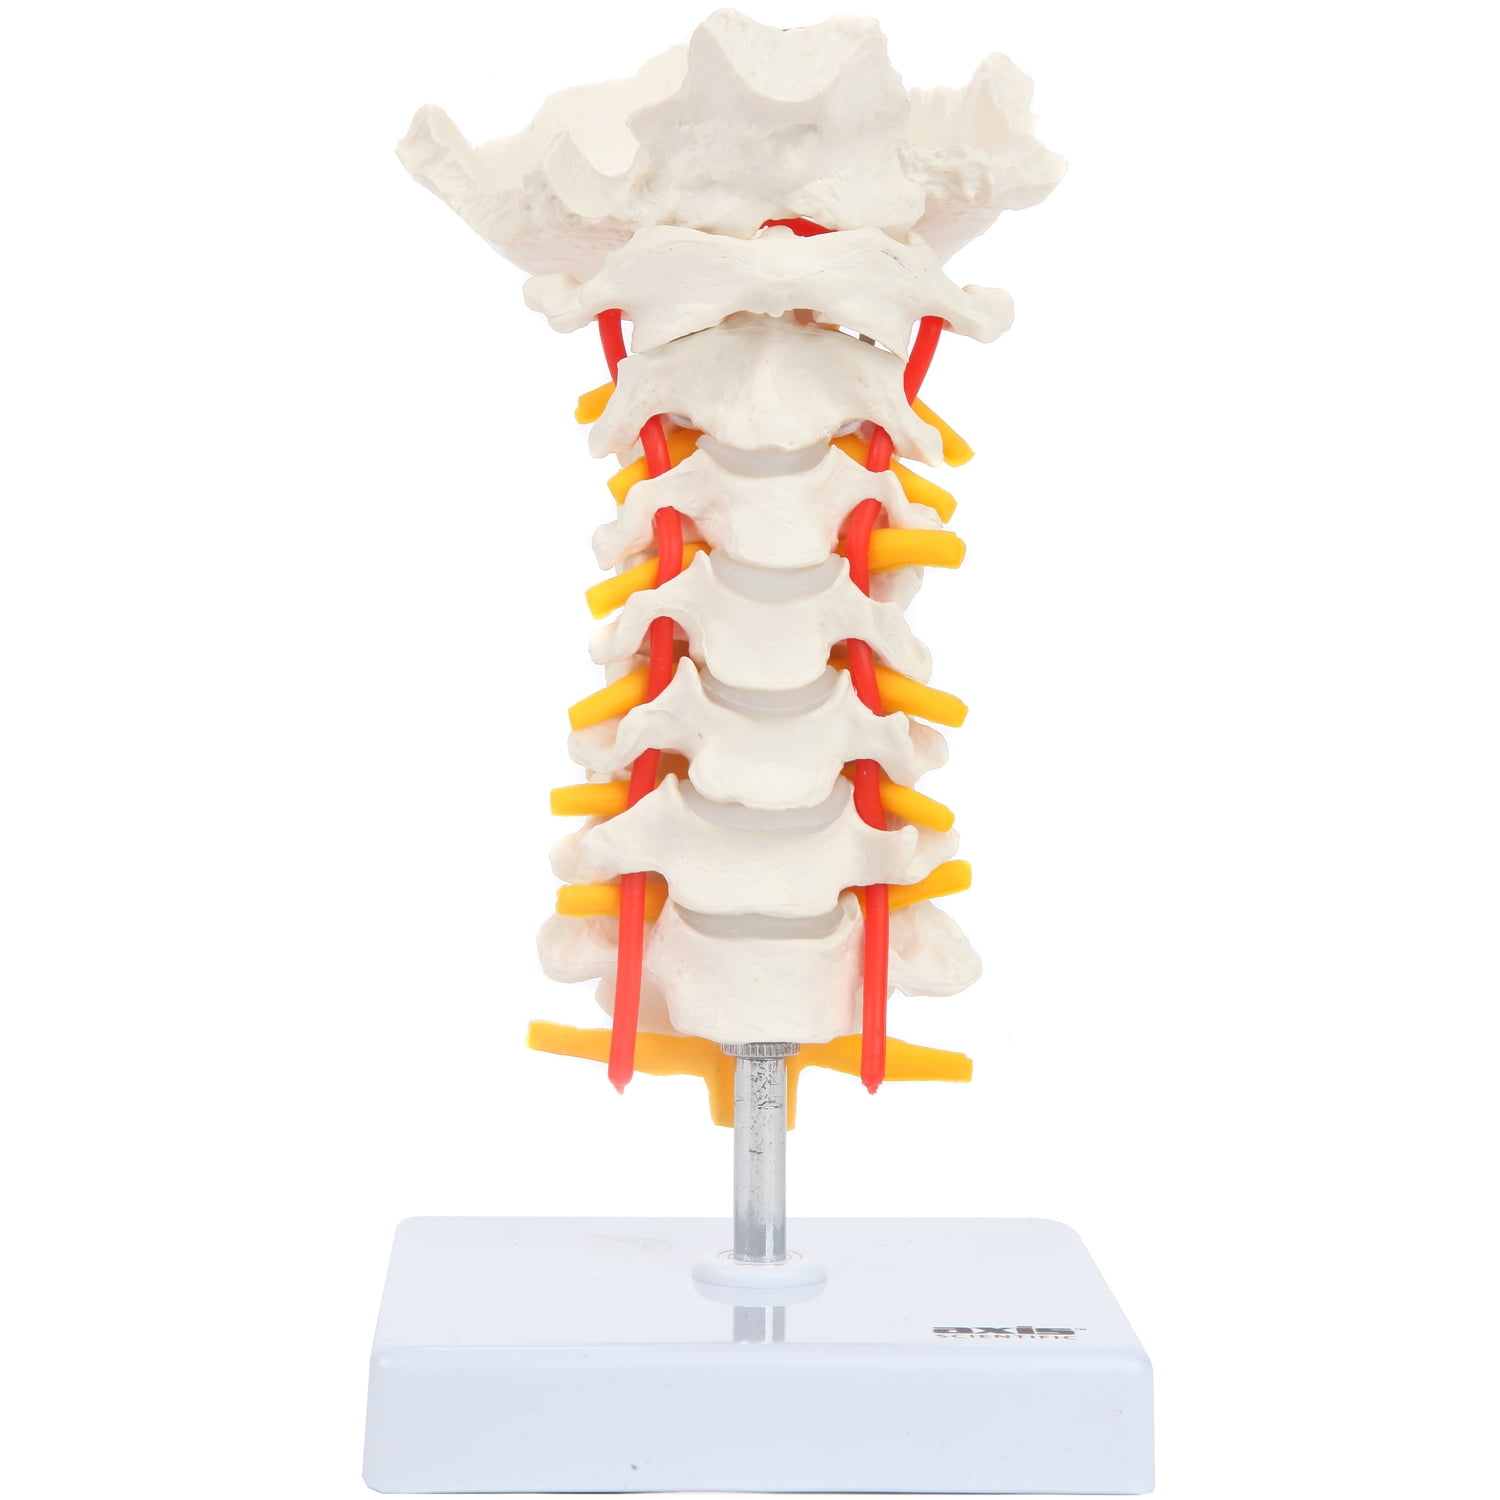 Axis Scientific Cervical Spine Model with Spinal Nerves and Arteries ...